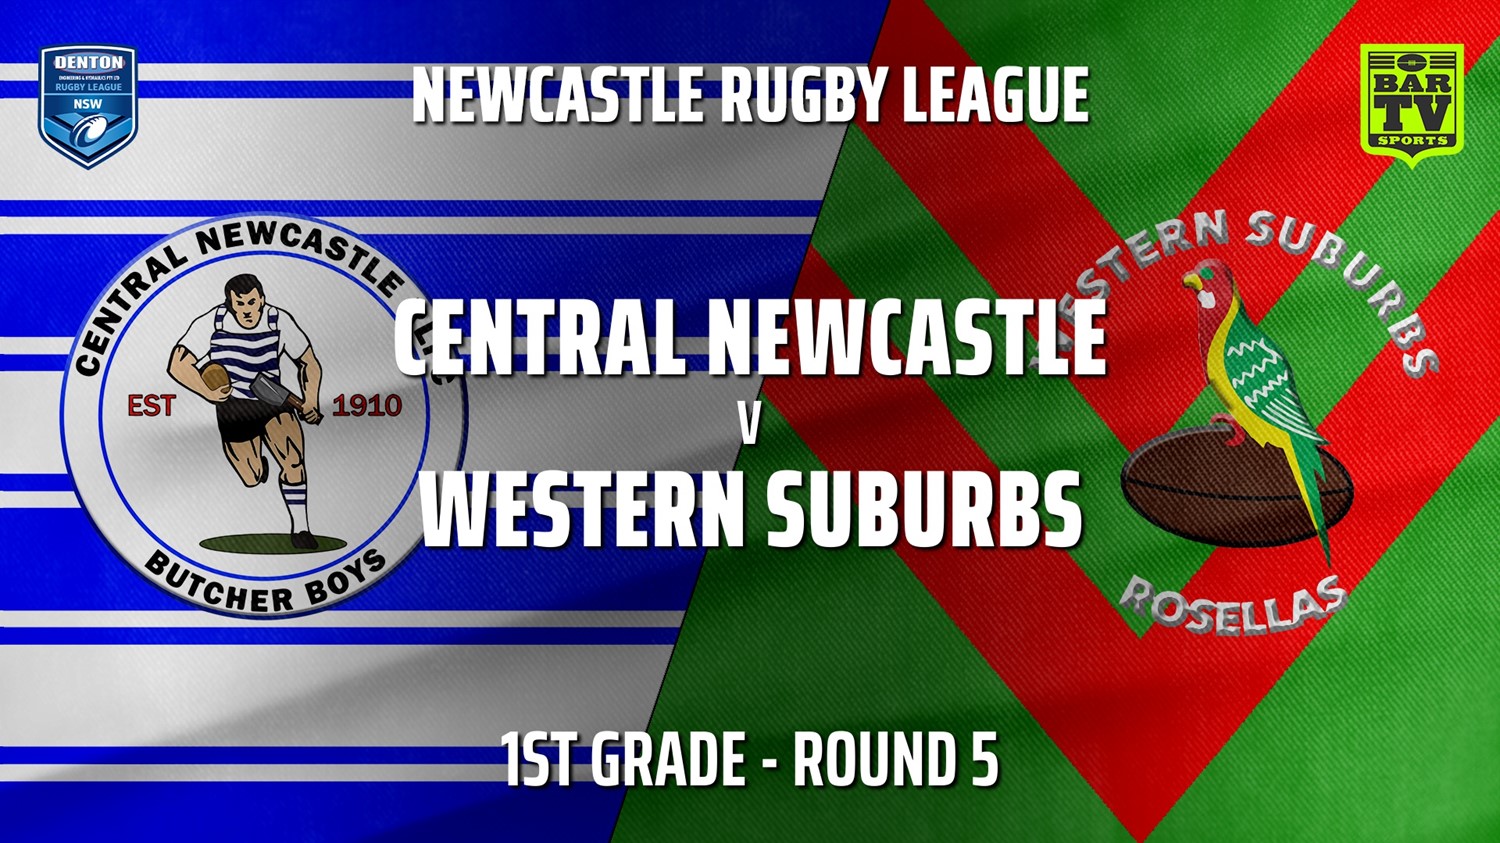 210422-Newcastle Rugby League Round 5 - 1st Grade - Central Newcastle v Western Suburbs Rosellas Minigame Slate Image